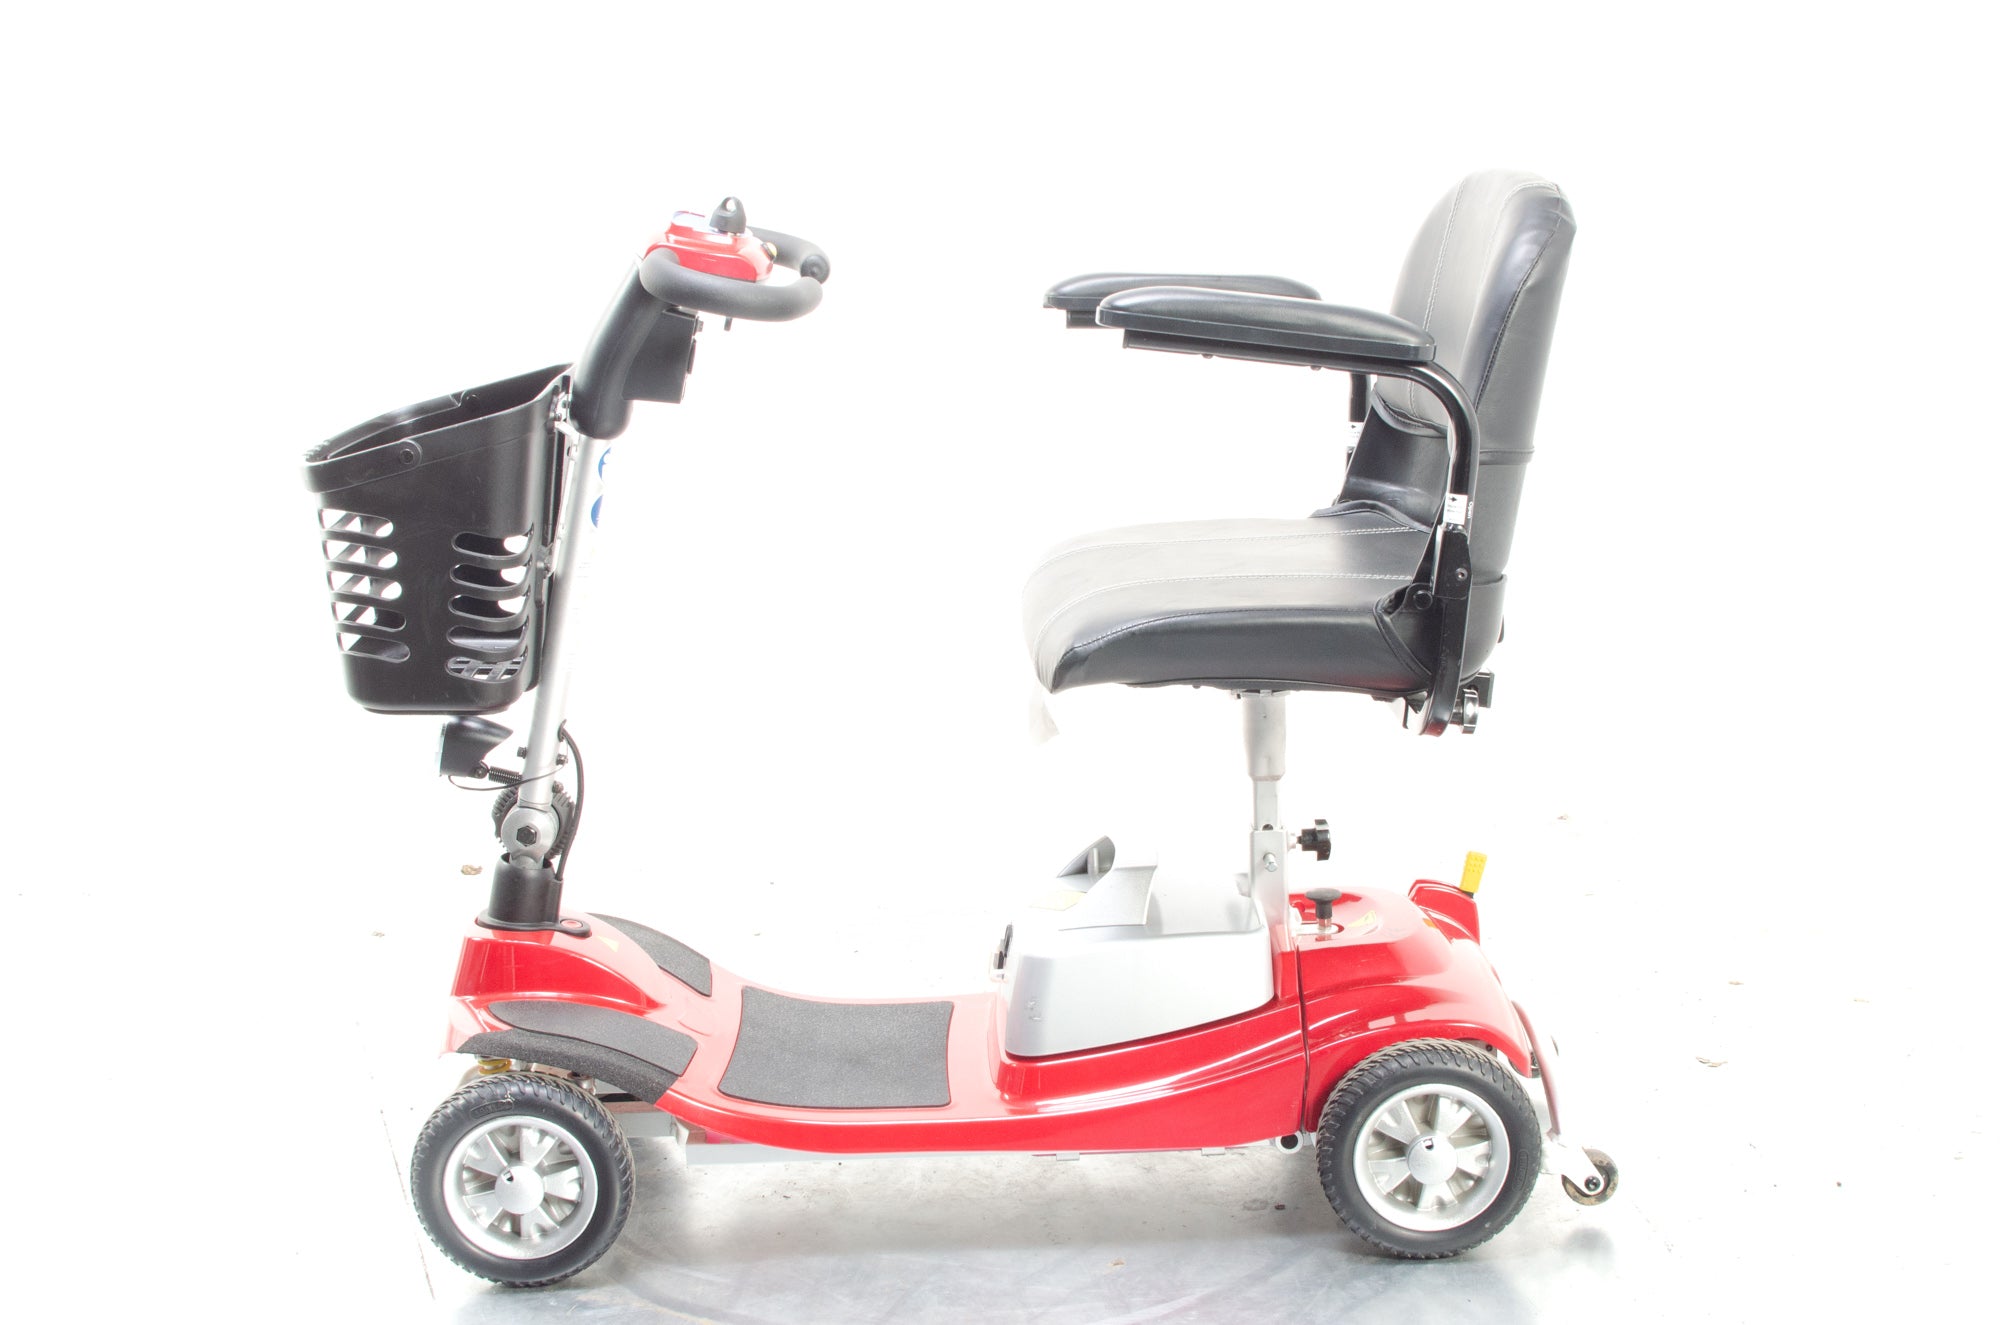 One Rehab Illusion 4mph Ultra Lightweight Aluminium Mobility Boot Scooter with Suspension